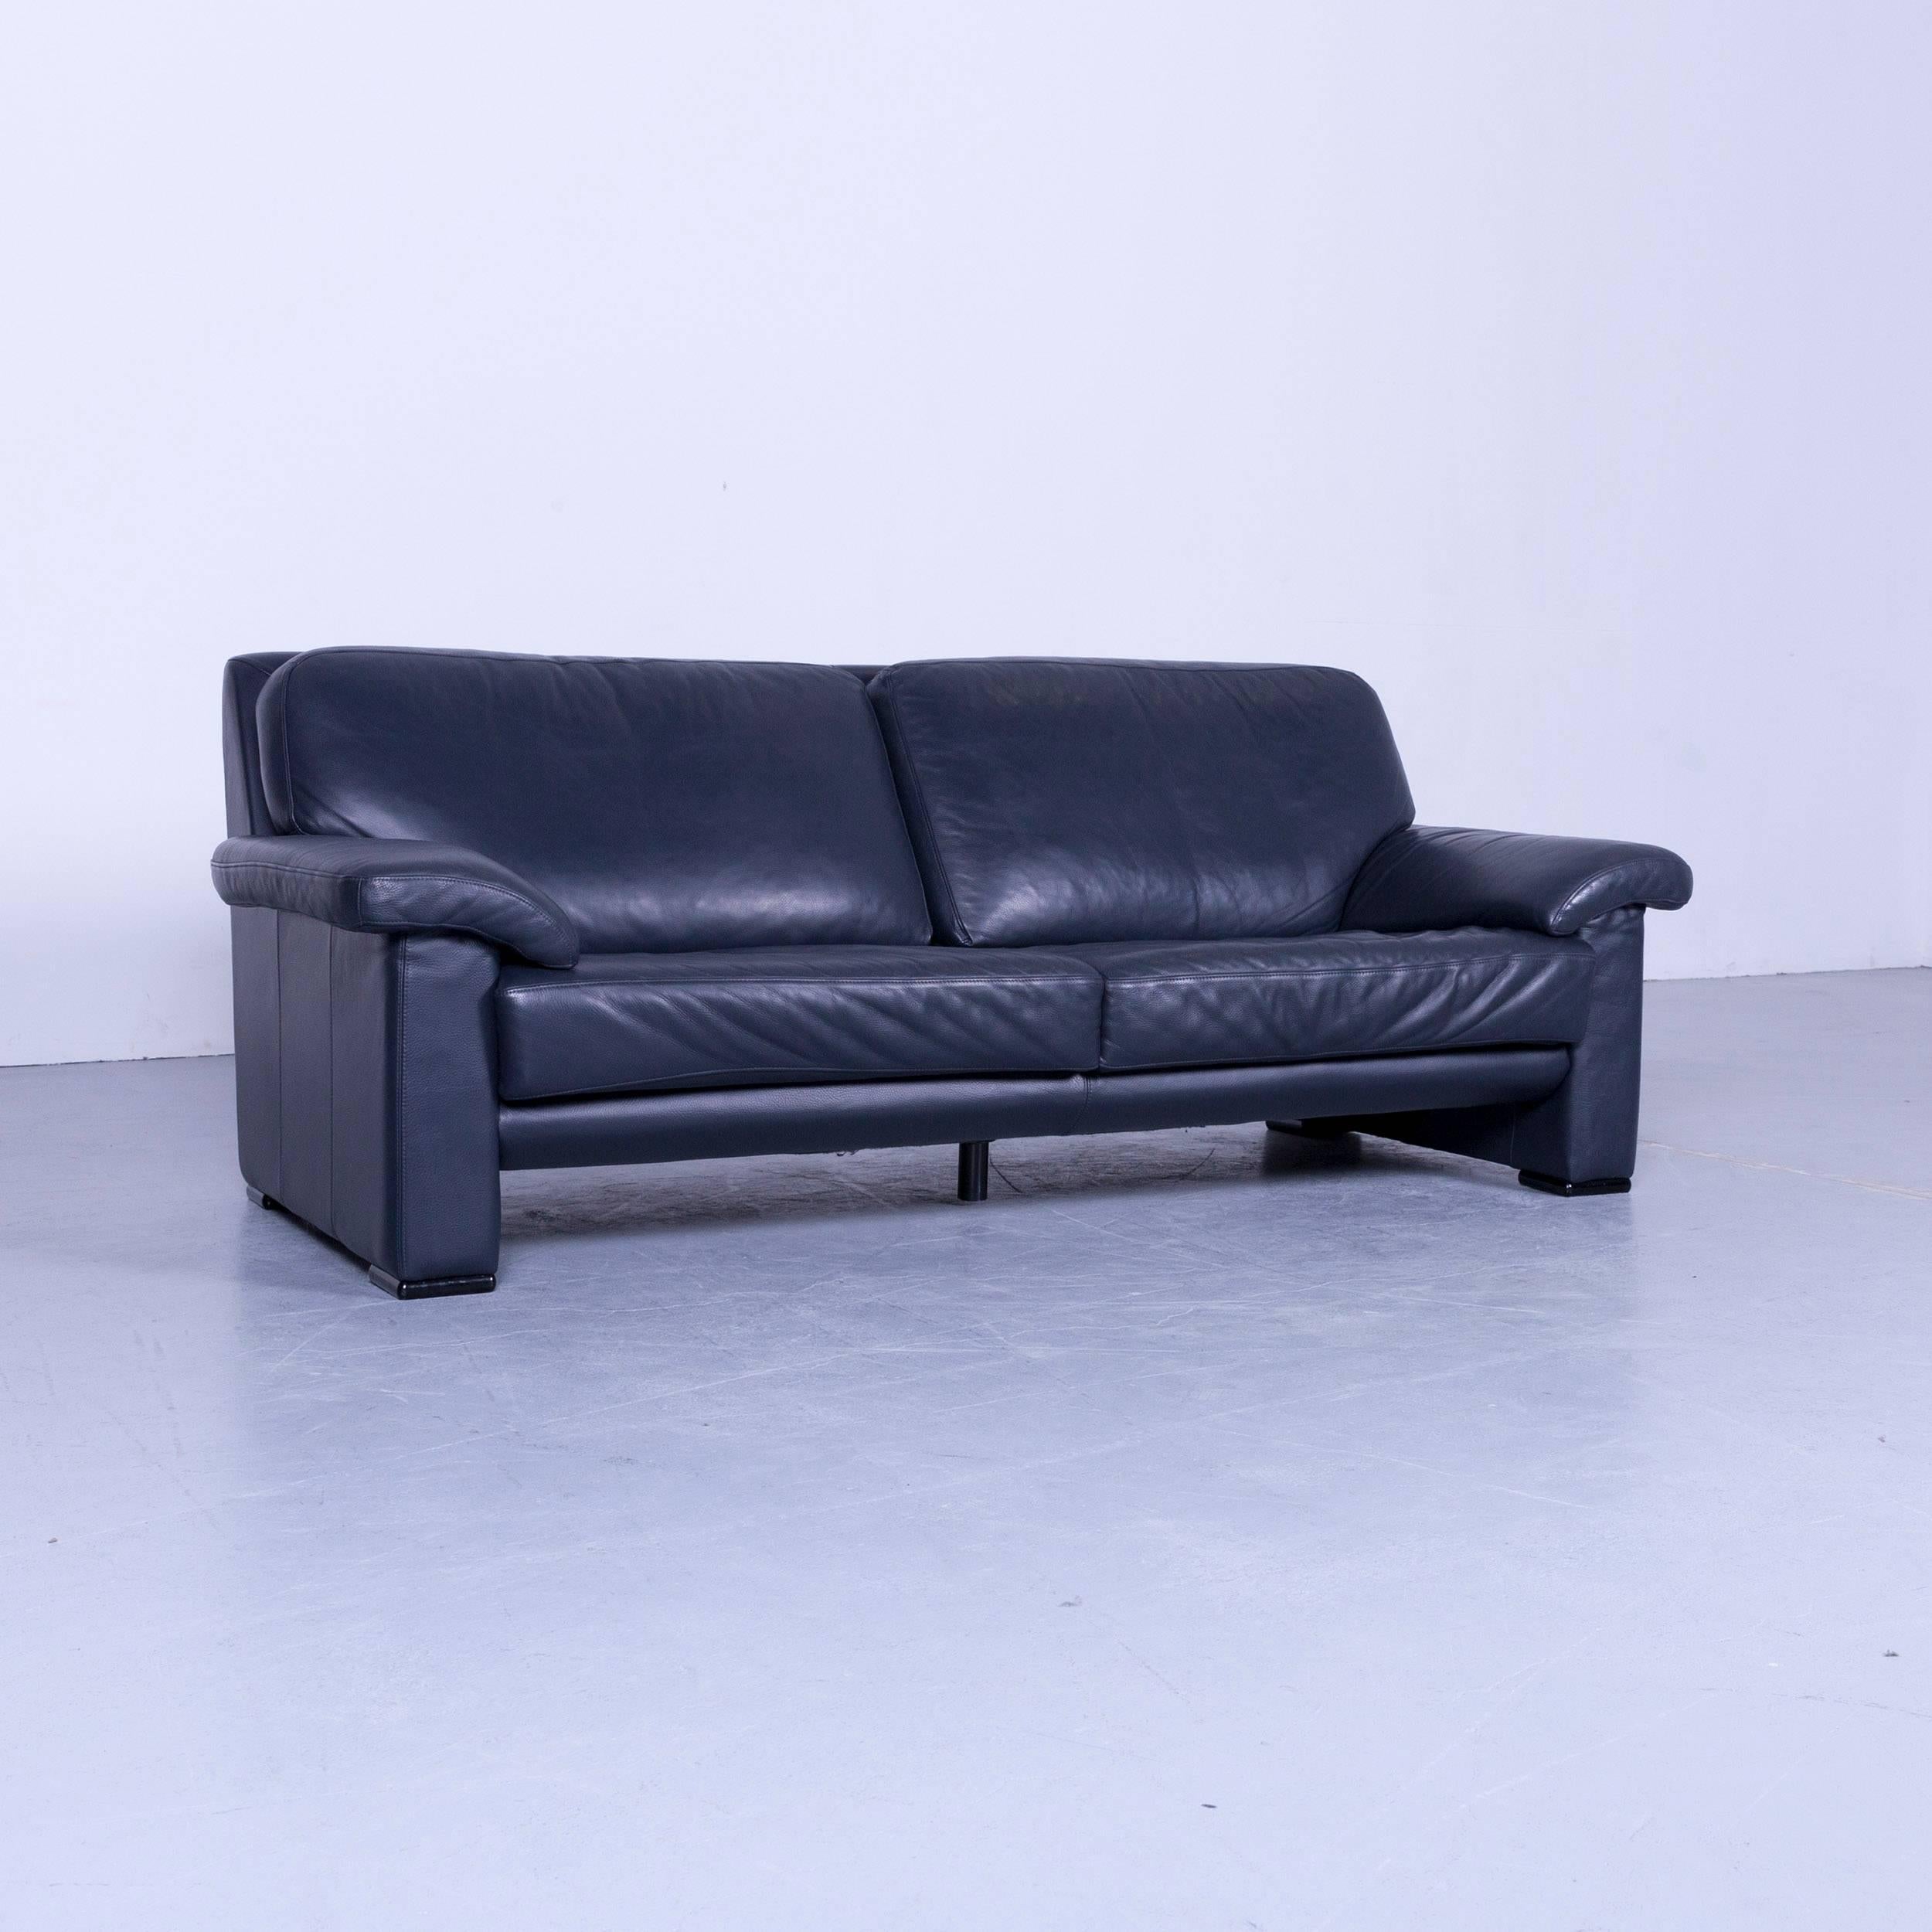 Ewald Schillig designer three-seat sofa in blue leather, in a minimalistic and modern design, made for pure comfort and style.